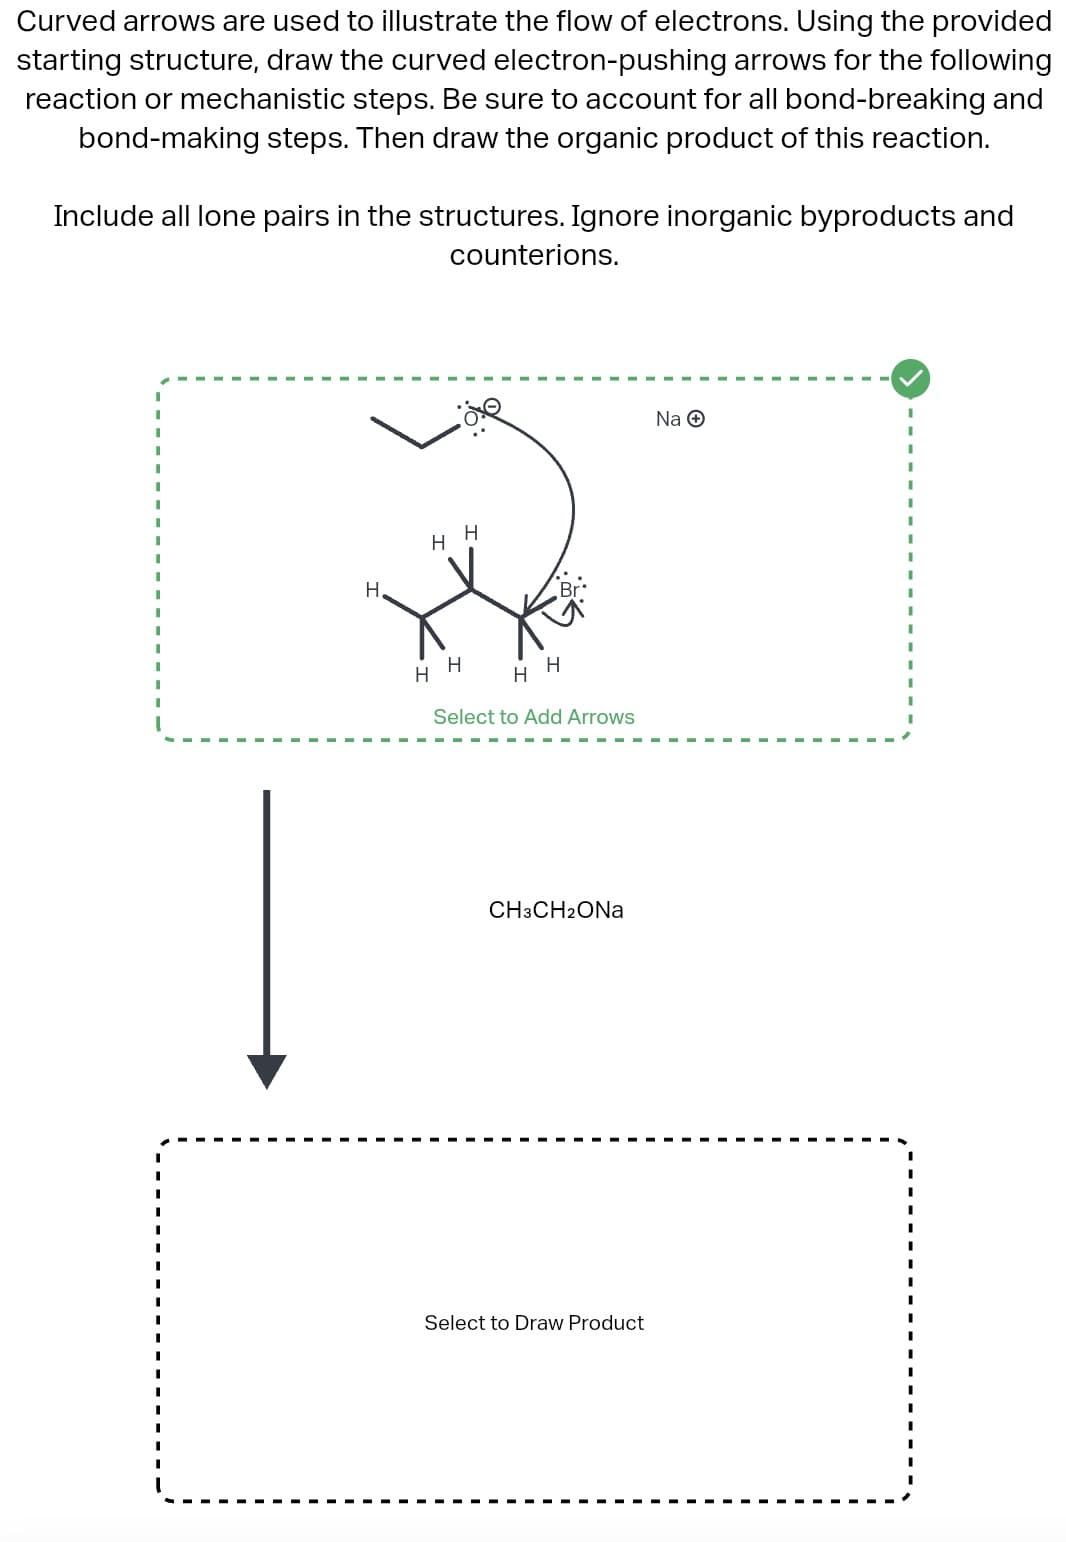 Curved arrows are used to illustrate the flow of electrons. Using the provided
starting structure, draw the curved electron-pushing arrows for the following
reaction or mechanistic steps. Be sure to account for all bond-breaking and
bond-making steps. Then draw the organic product of this reaction.
Include all lone pairs in the structures. Ignore inorganic byproducts and
counterions.
H.
H
H
H
H
H
H
Select to Add Arrows
CH3CH2ONa
Select to Draw Product
Na Ⓒ